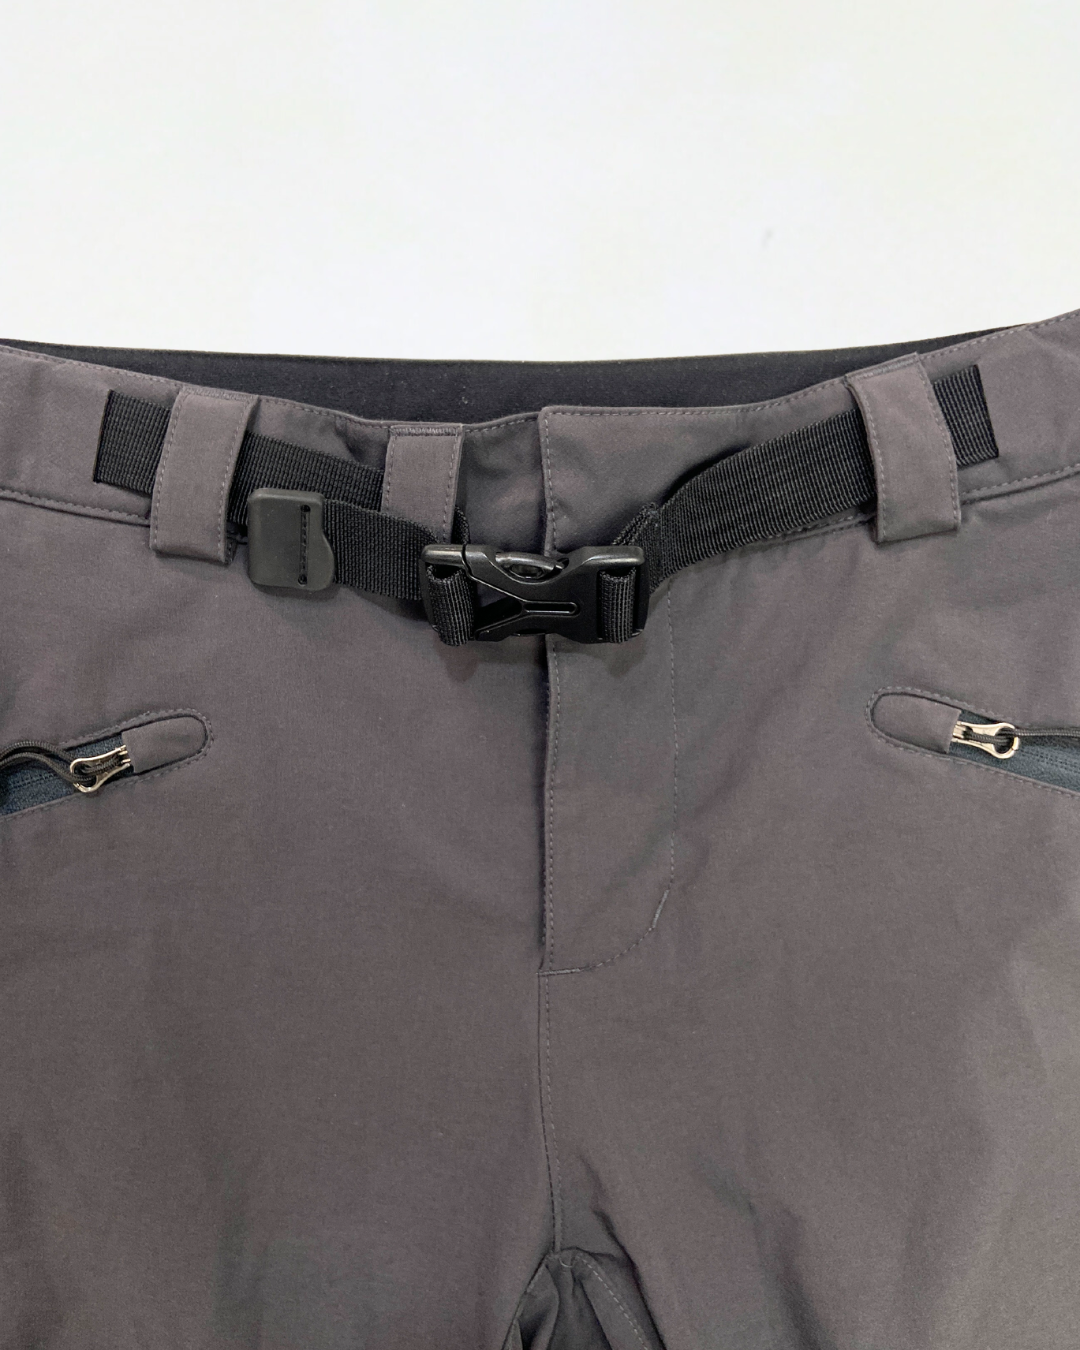 North Ridge Performance Outdoor Pants with Zip Pockets